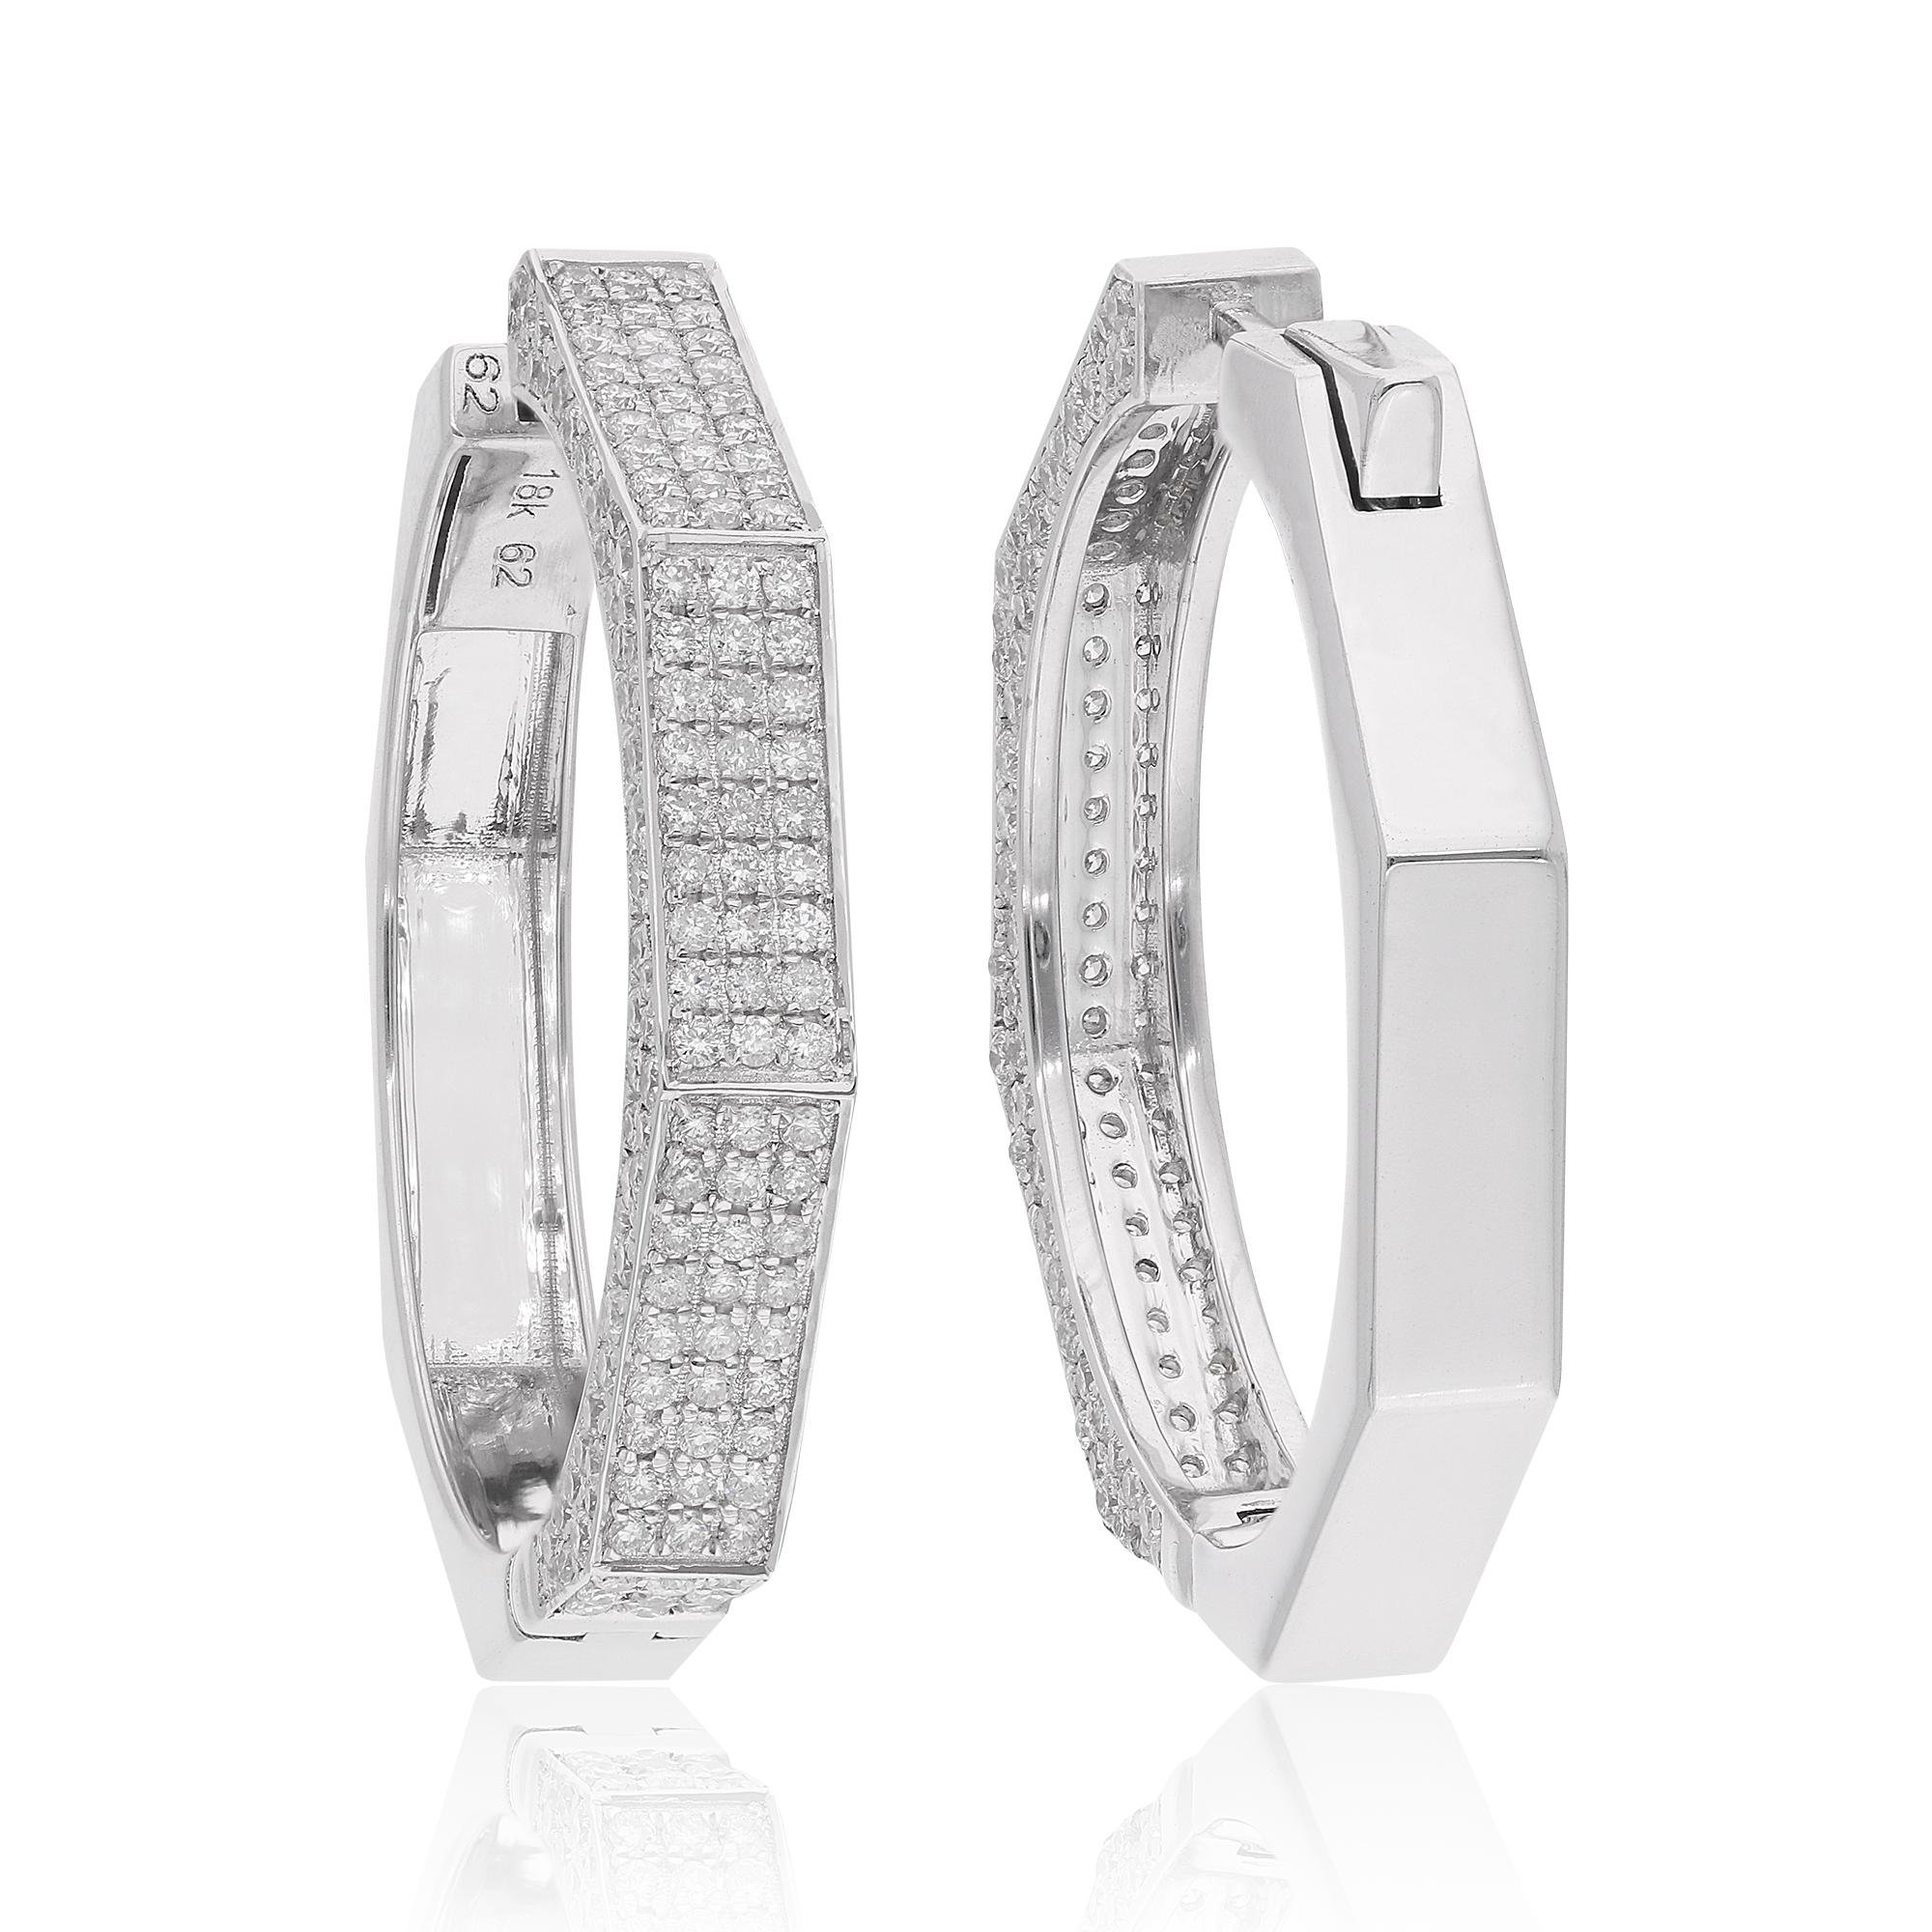 Step into the realm of timeless sophistication with these exquisite natural pave diamond hoop earrings, crafted to perfection in luxurious 18 karat white gold. With a total diamond weight of 2.17 carats, these earrings are a stunning testament to